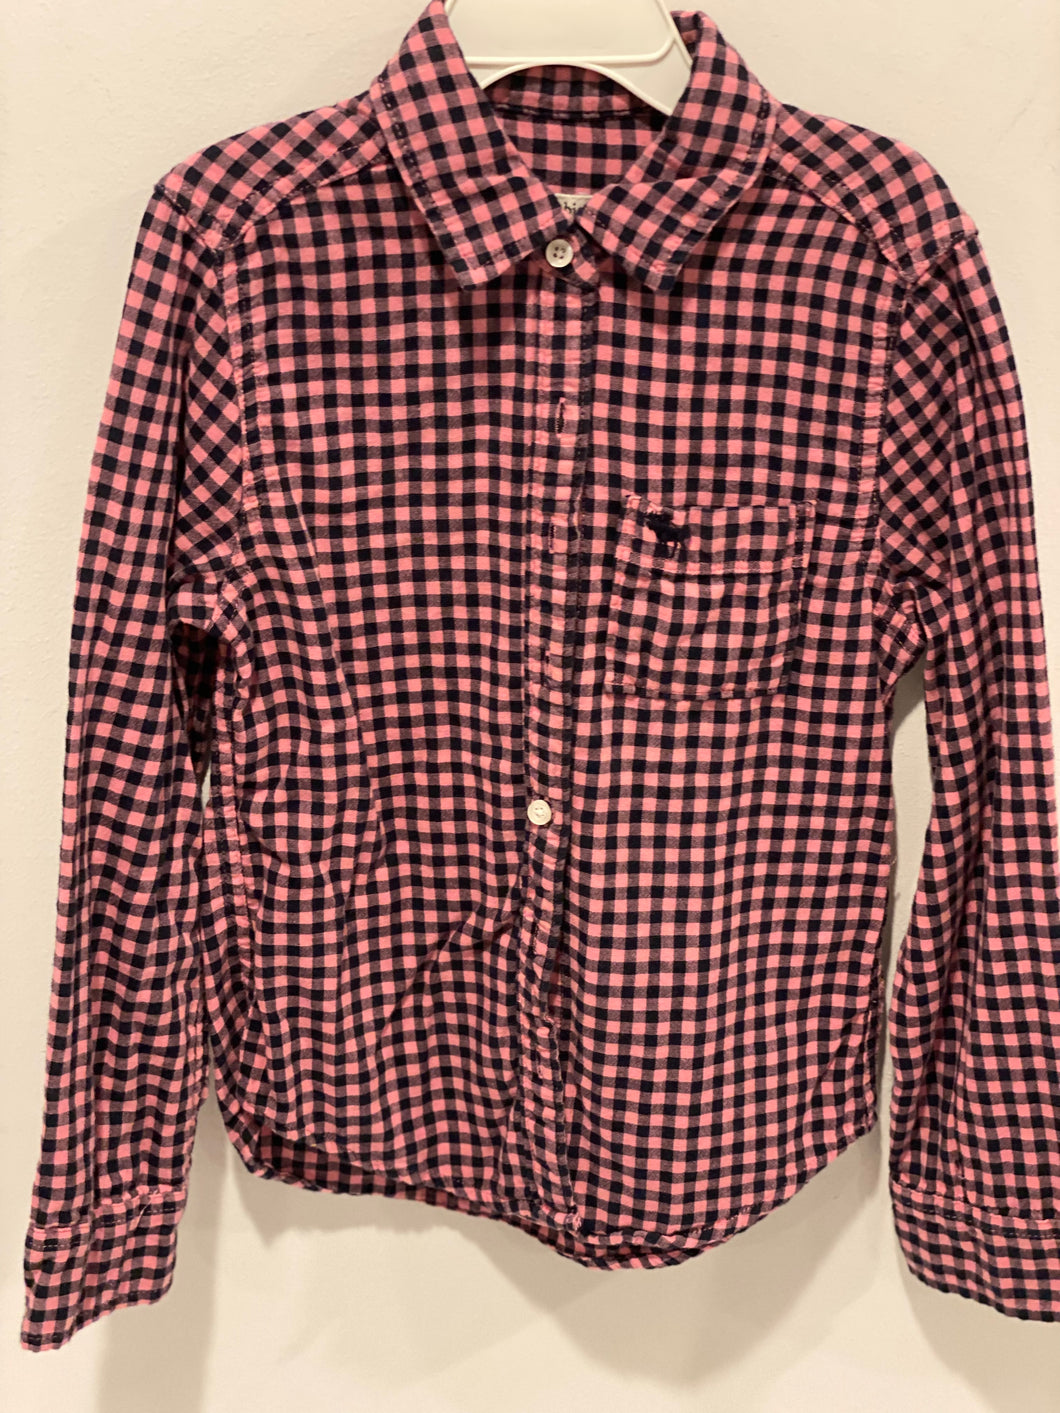 Abercrombie pink/navy plaid button up 7